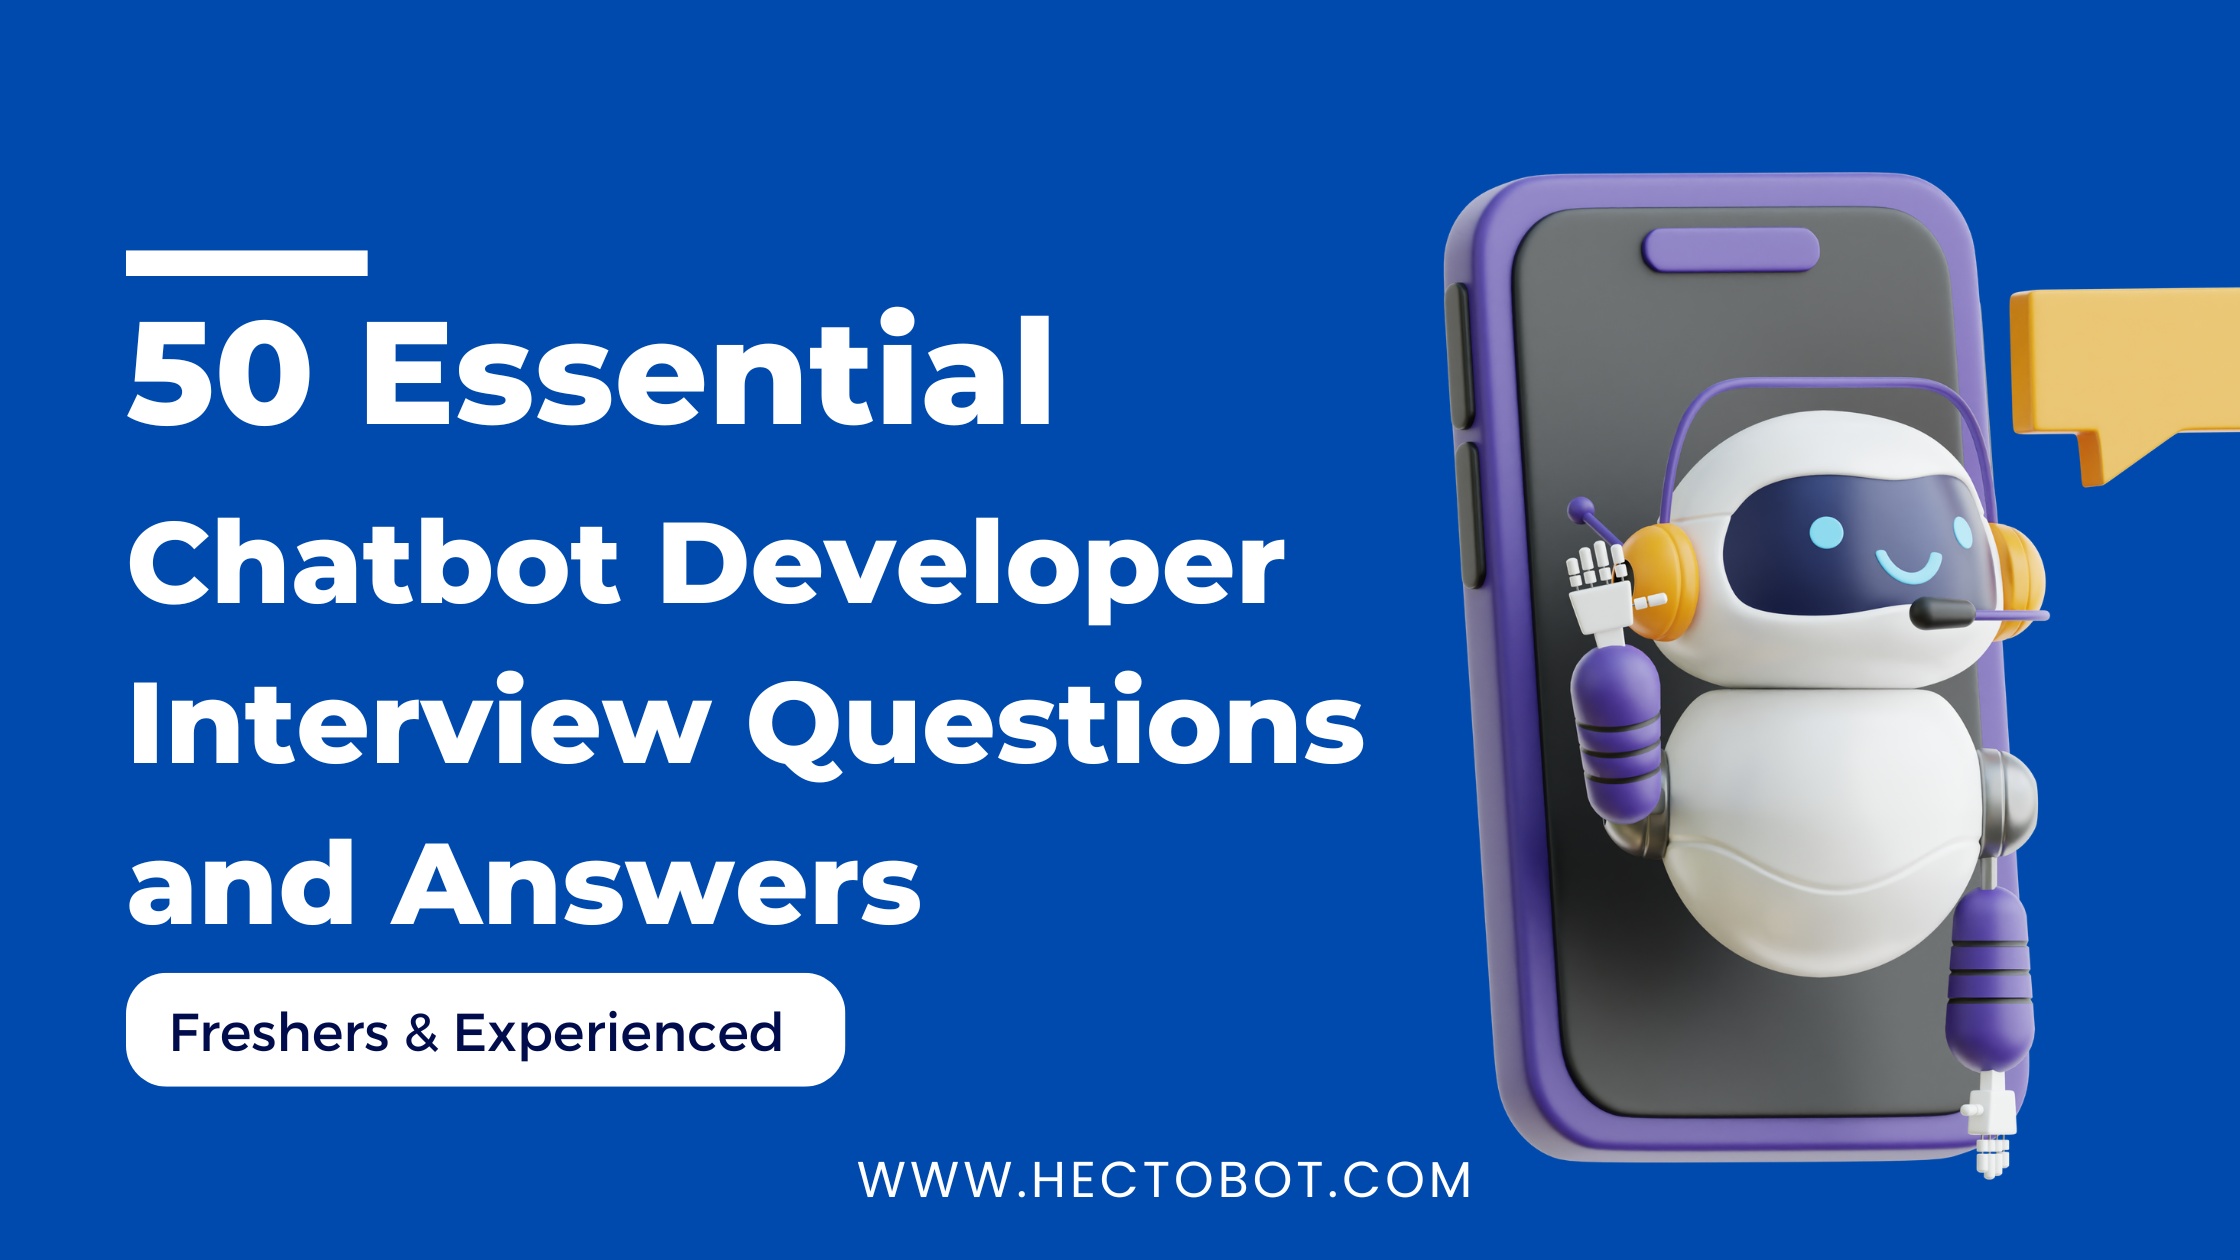 50 Essential Chatbot Developer Interview Questions and Answers